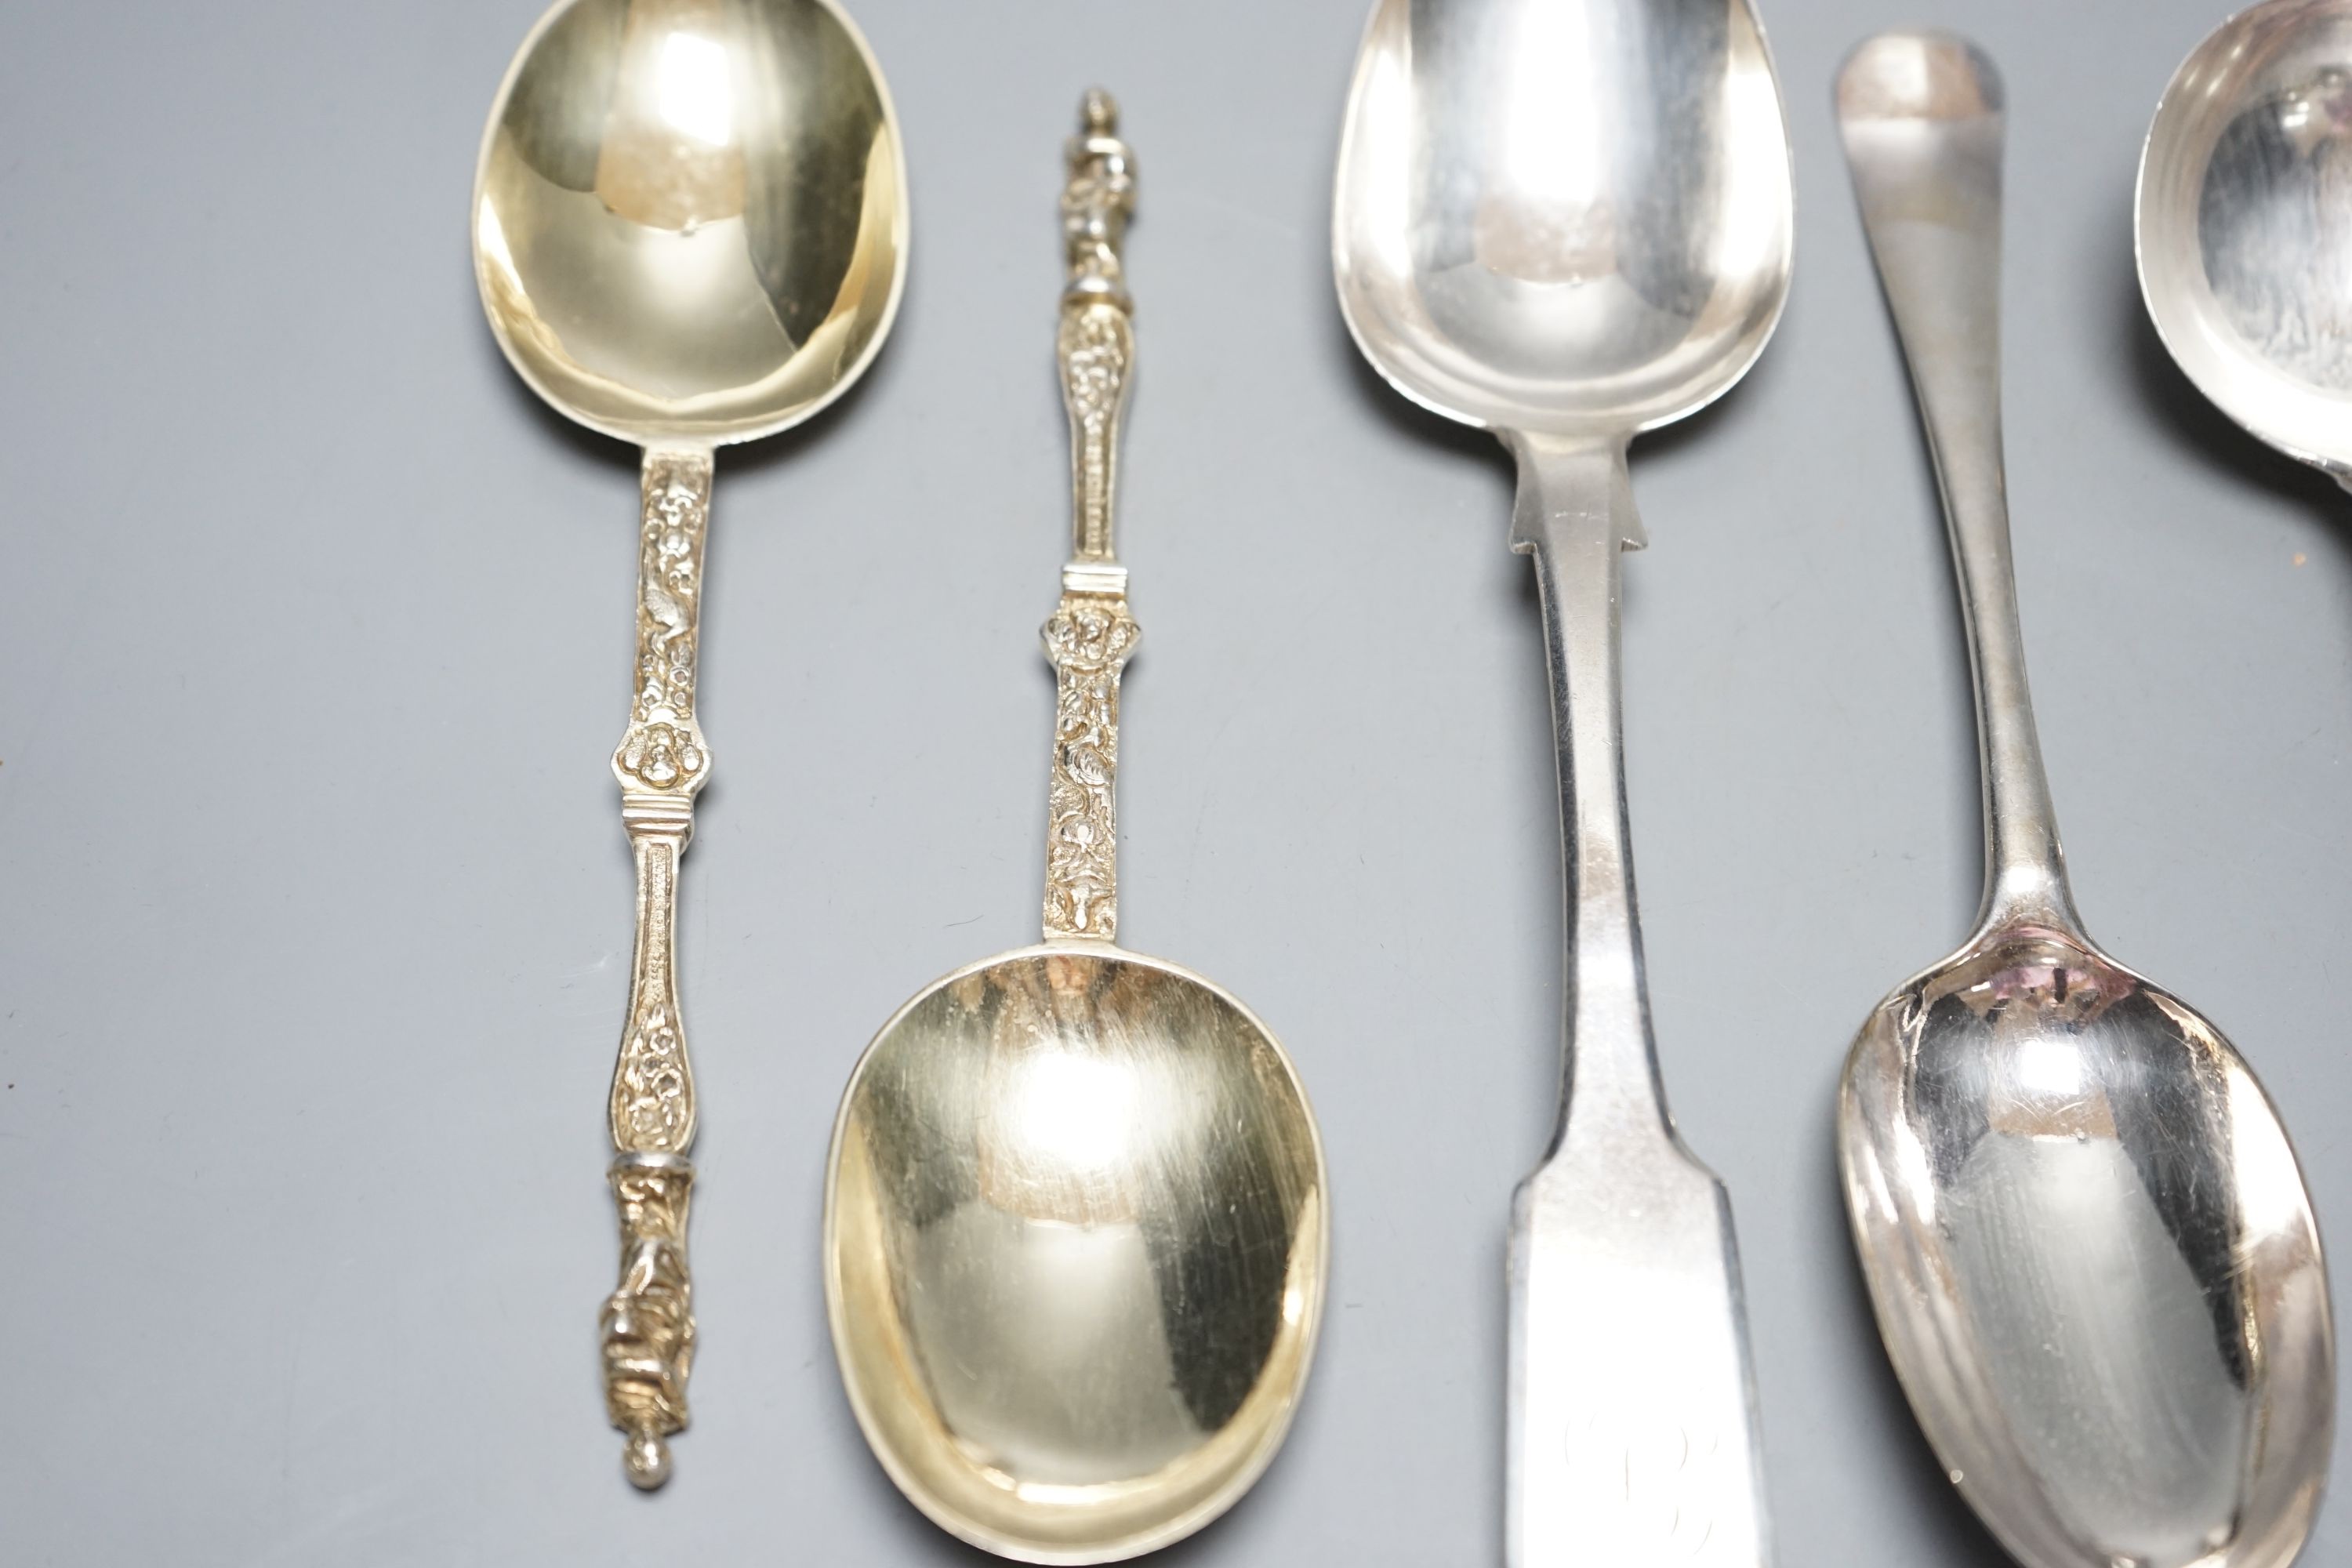 A pair of George III silver Old English pattern sauce ladles, London, 1782, 18cm, a pair of Victorian silver gilt apostle spoons, London, 1877, two Georgian silver spoons, London, 1744 & Exeter, 1818 and a sterling spoon